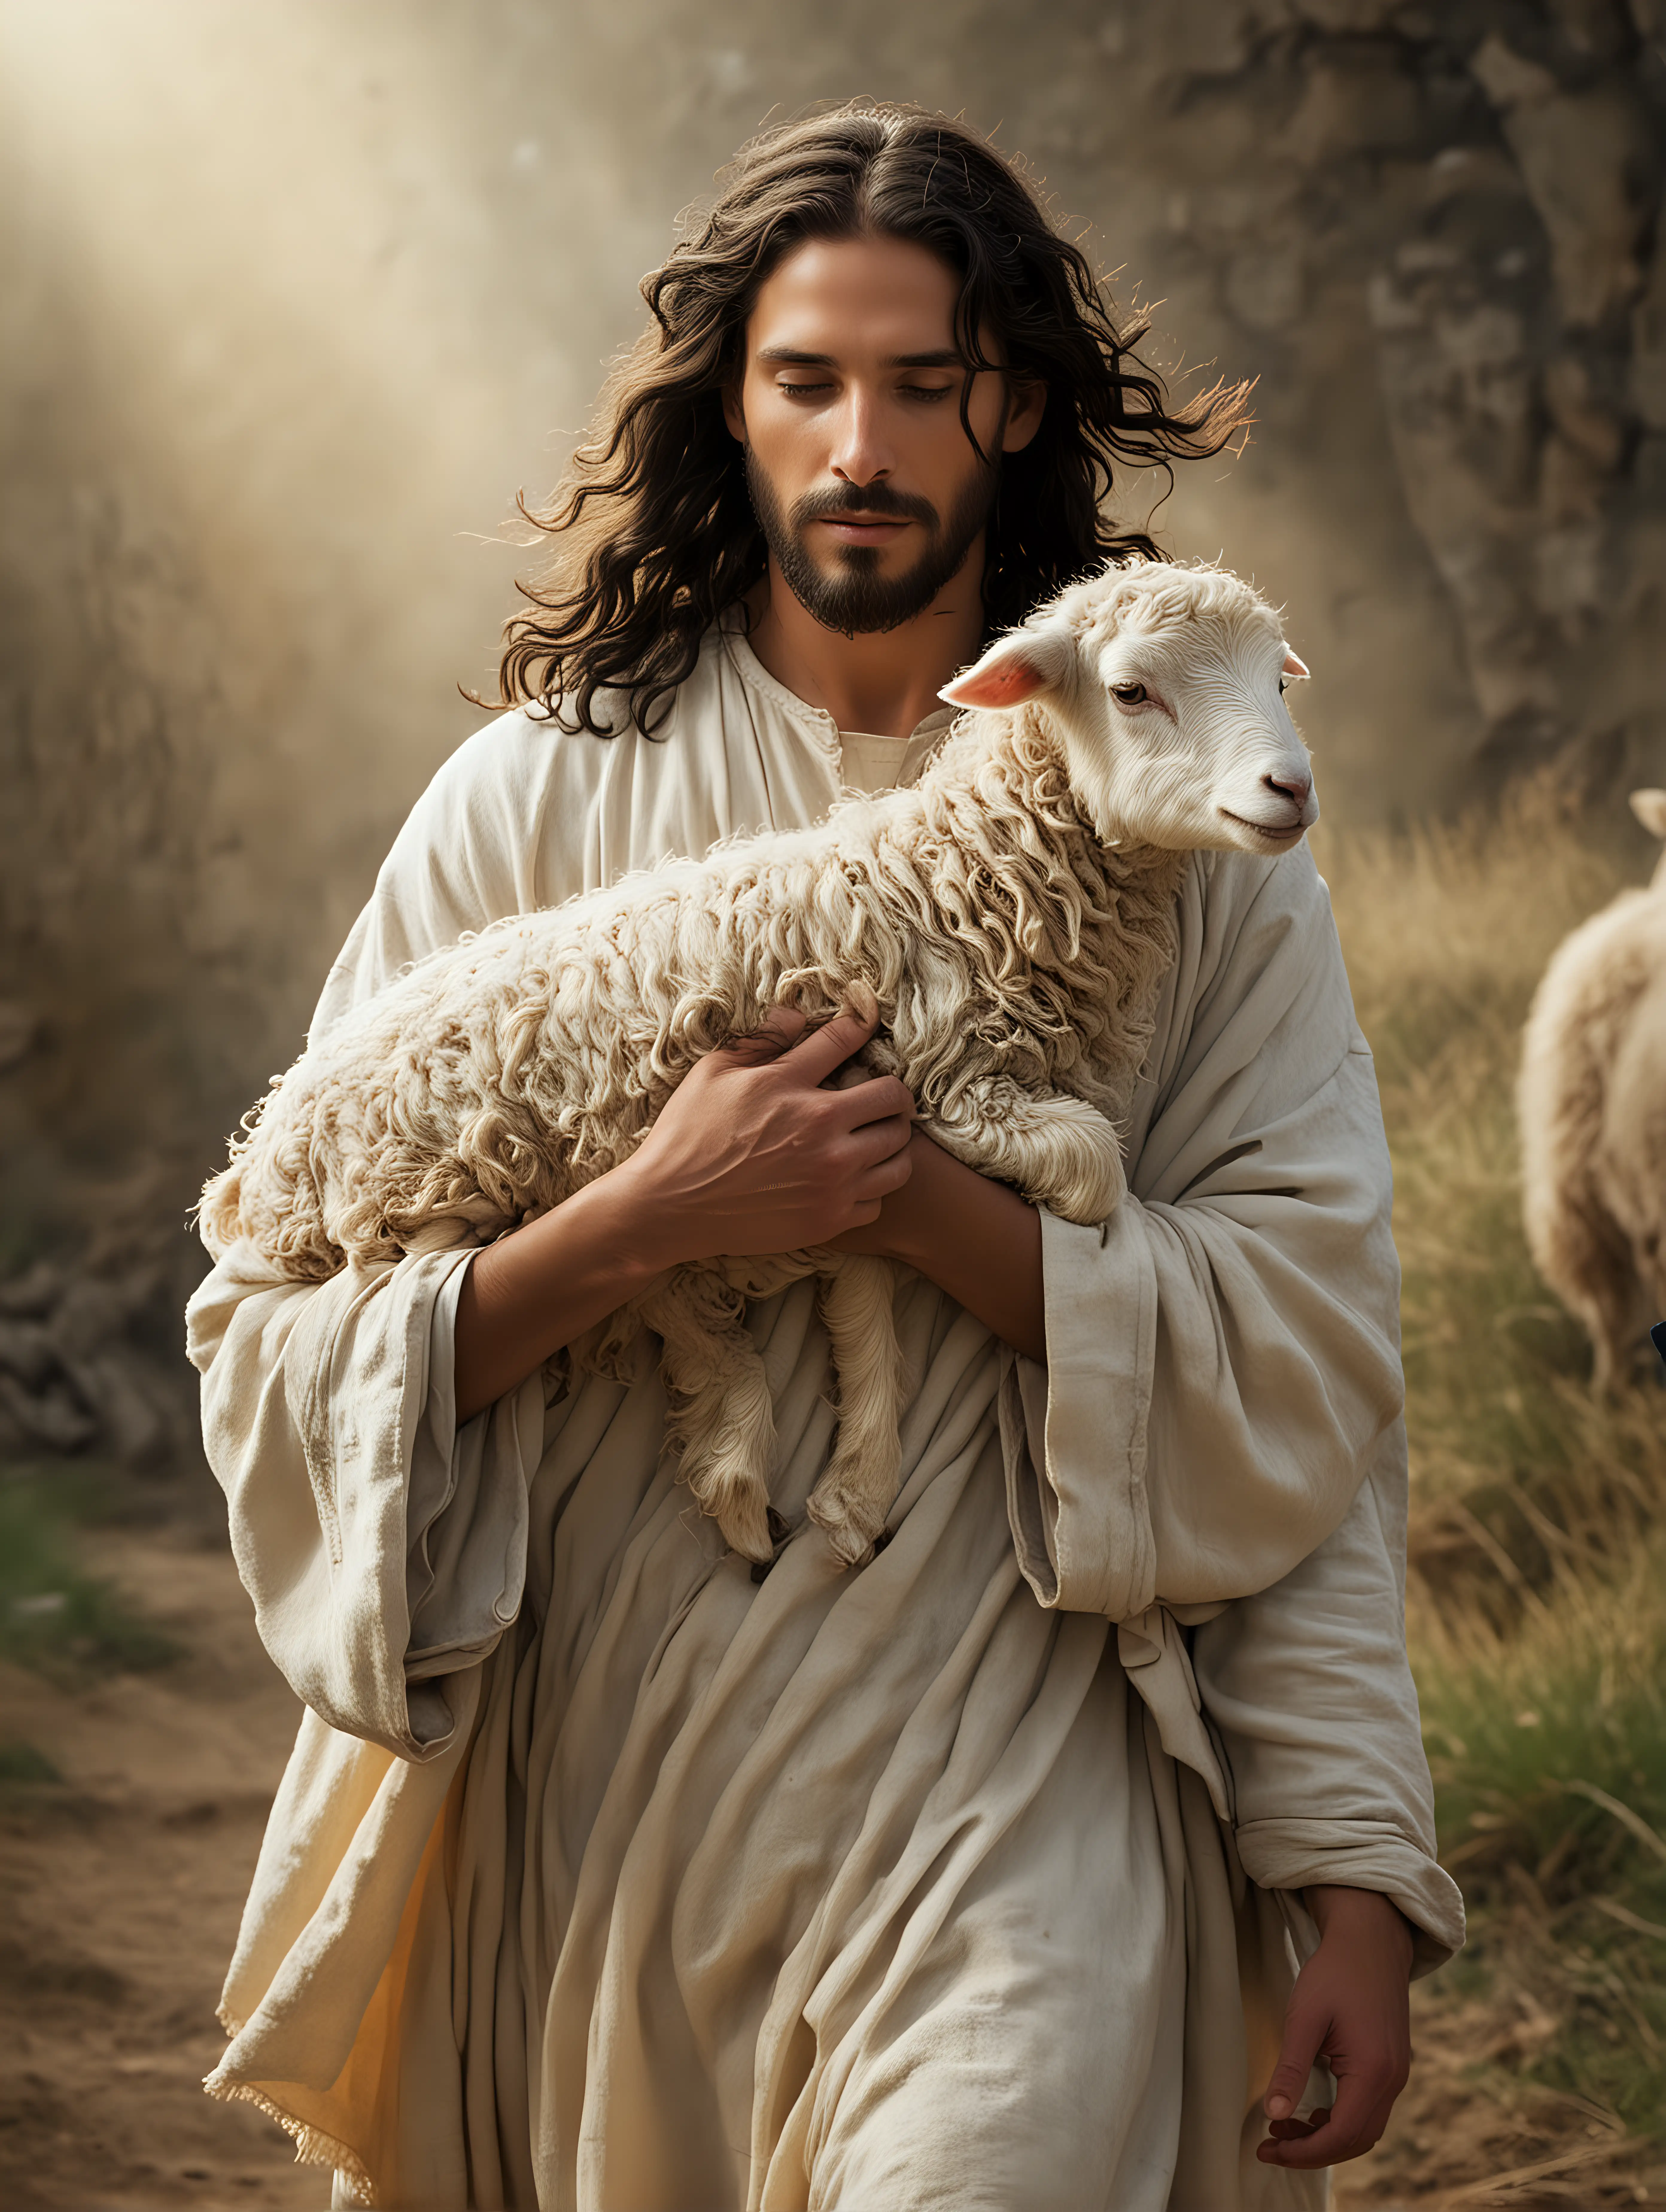 JESUS WITH LONG, DARK WAVY HAIR, CARRYING A LAMB IN HIS ARMS